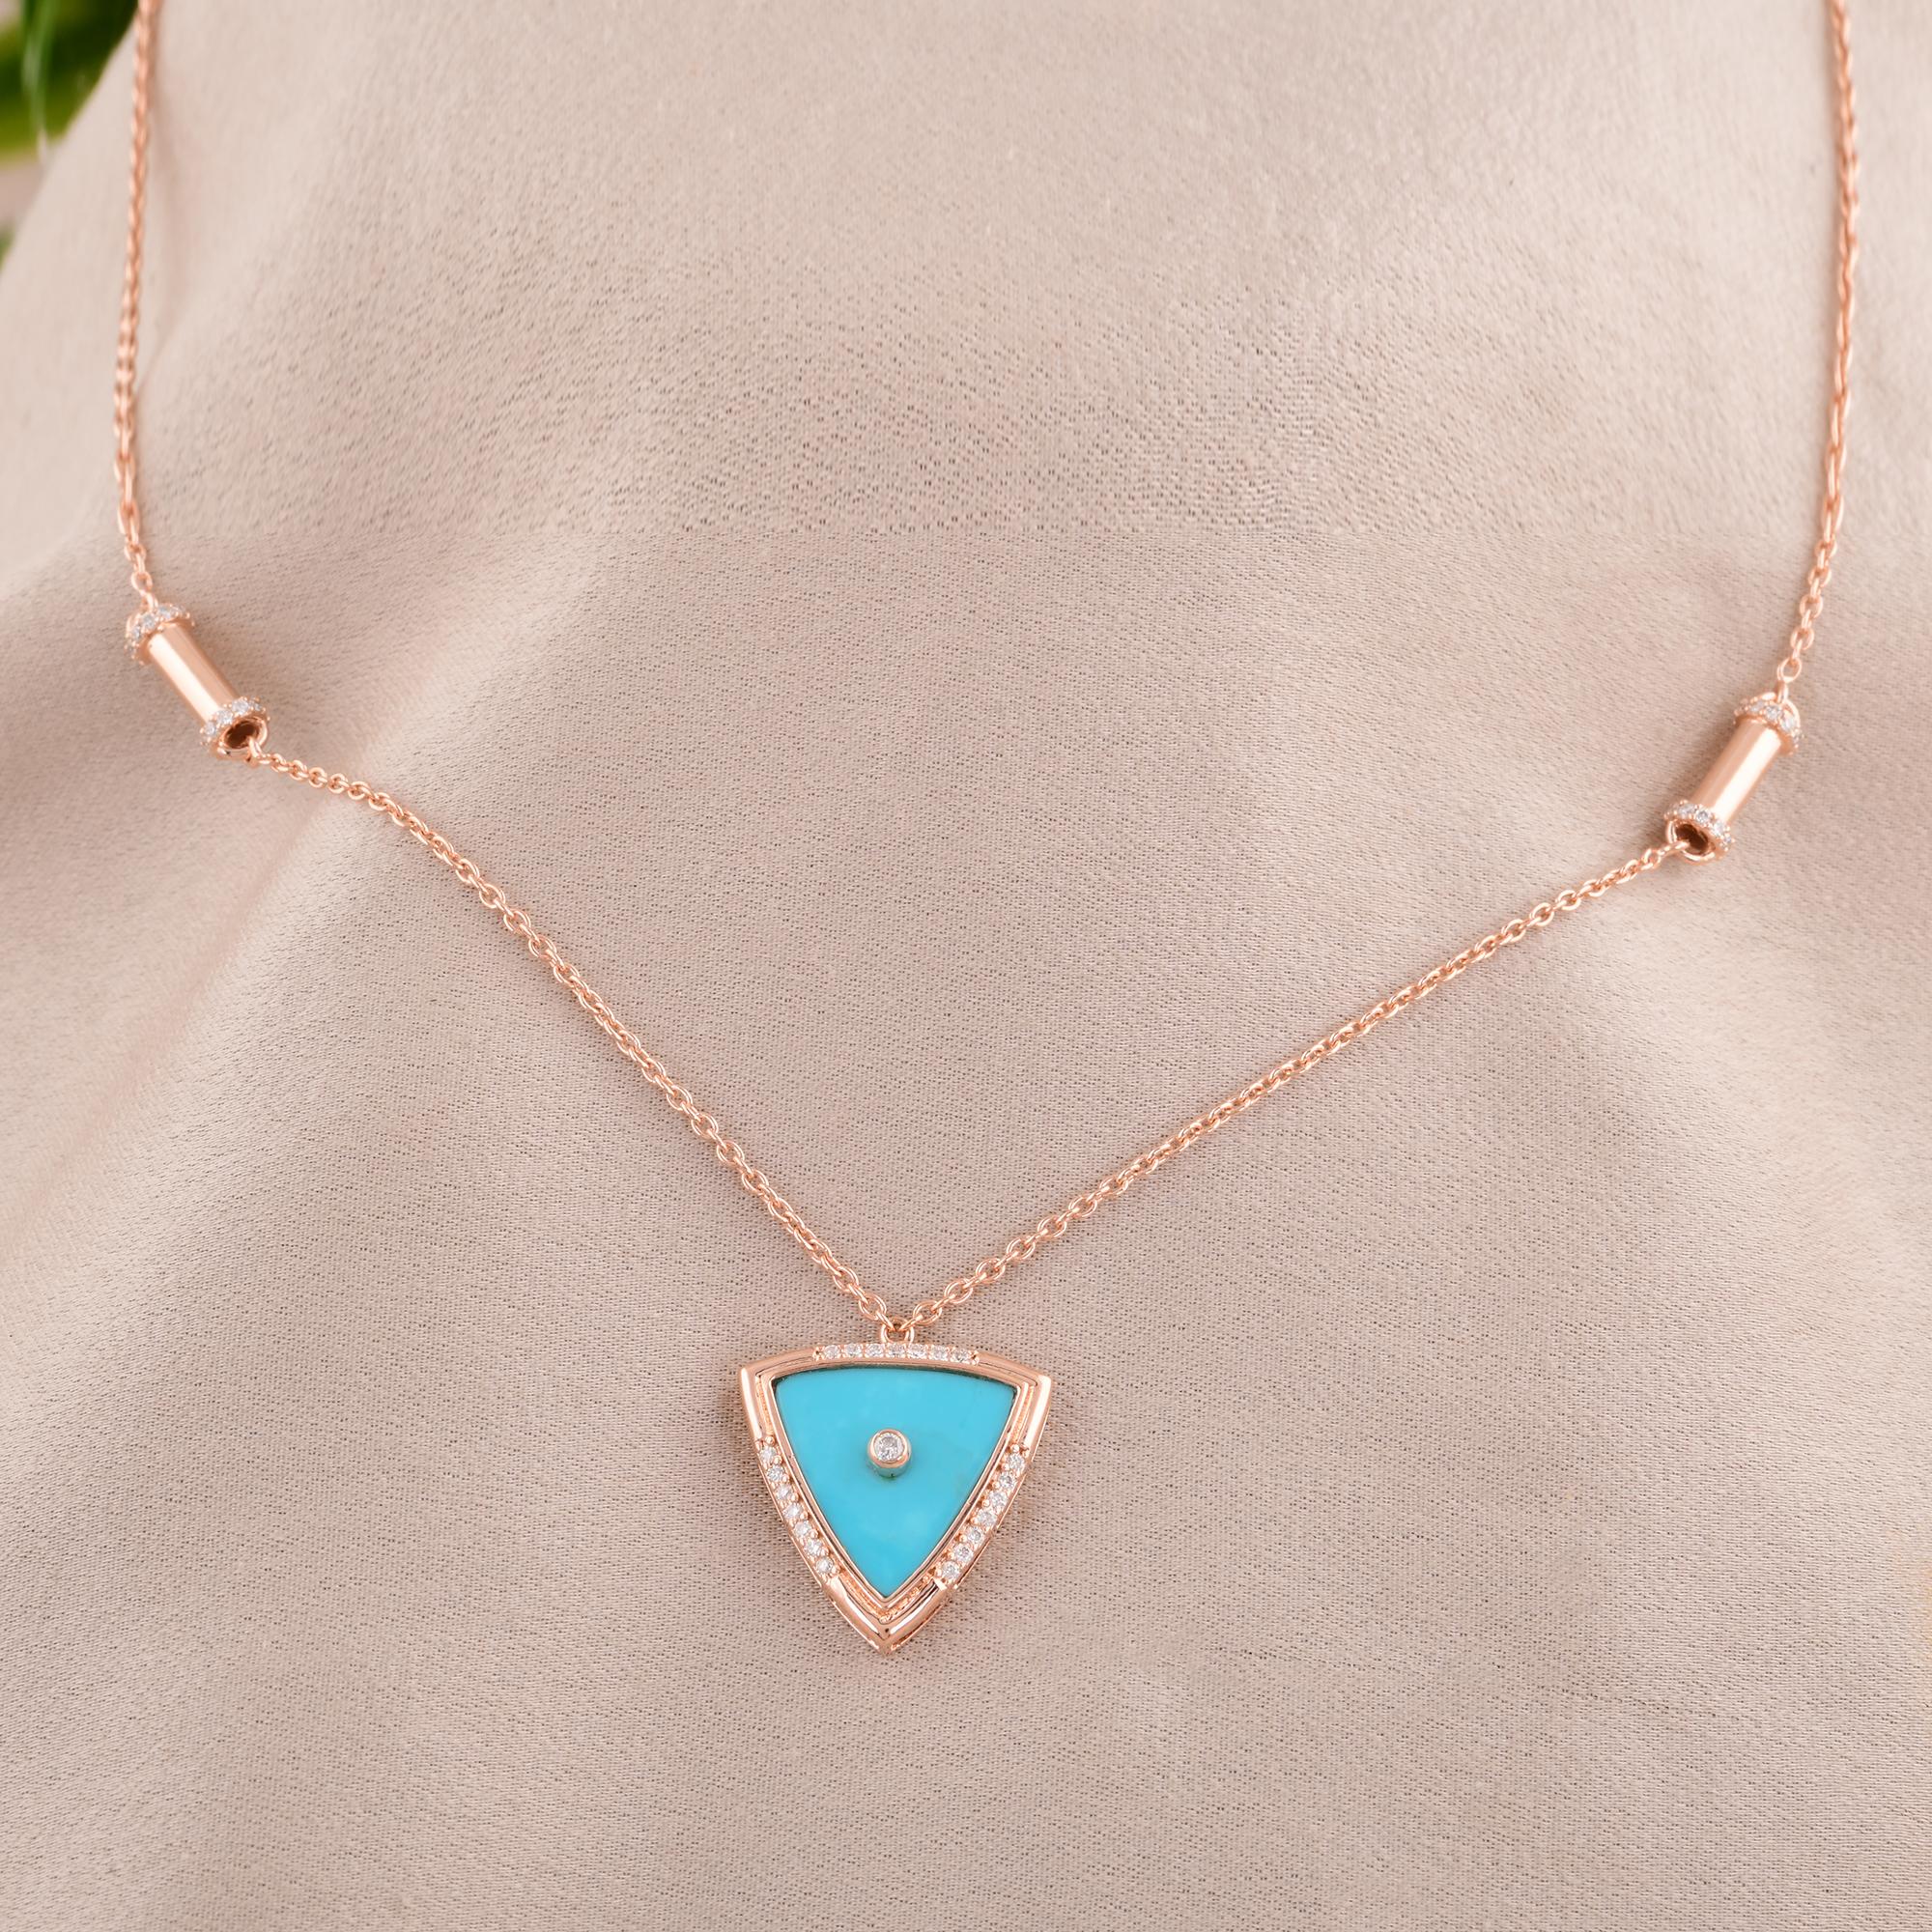 At the heart of the necklace gleams a striking arrowhead-shaped turquoise gemstone, renowned for its vibrant blue-green hue and unique markings. Sourced from the earth's depths, each turquoise stone possesses its own distinctive character, making it